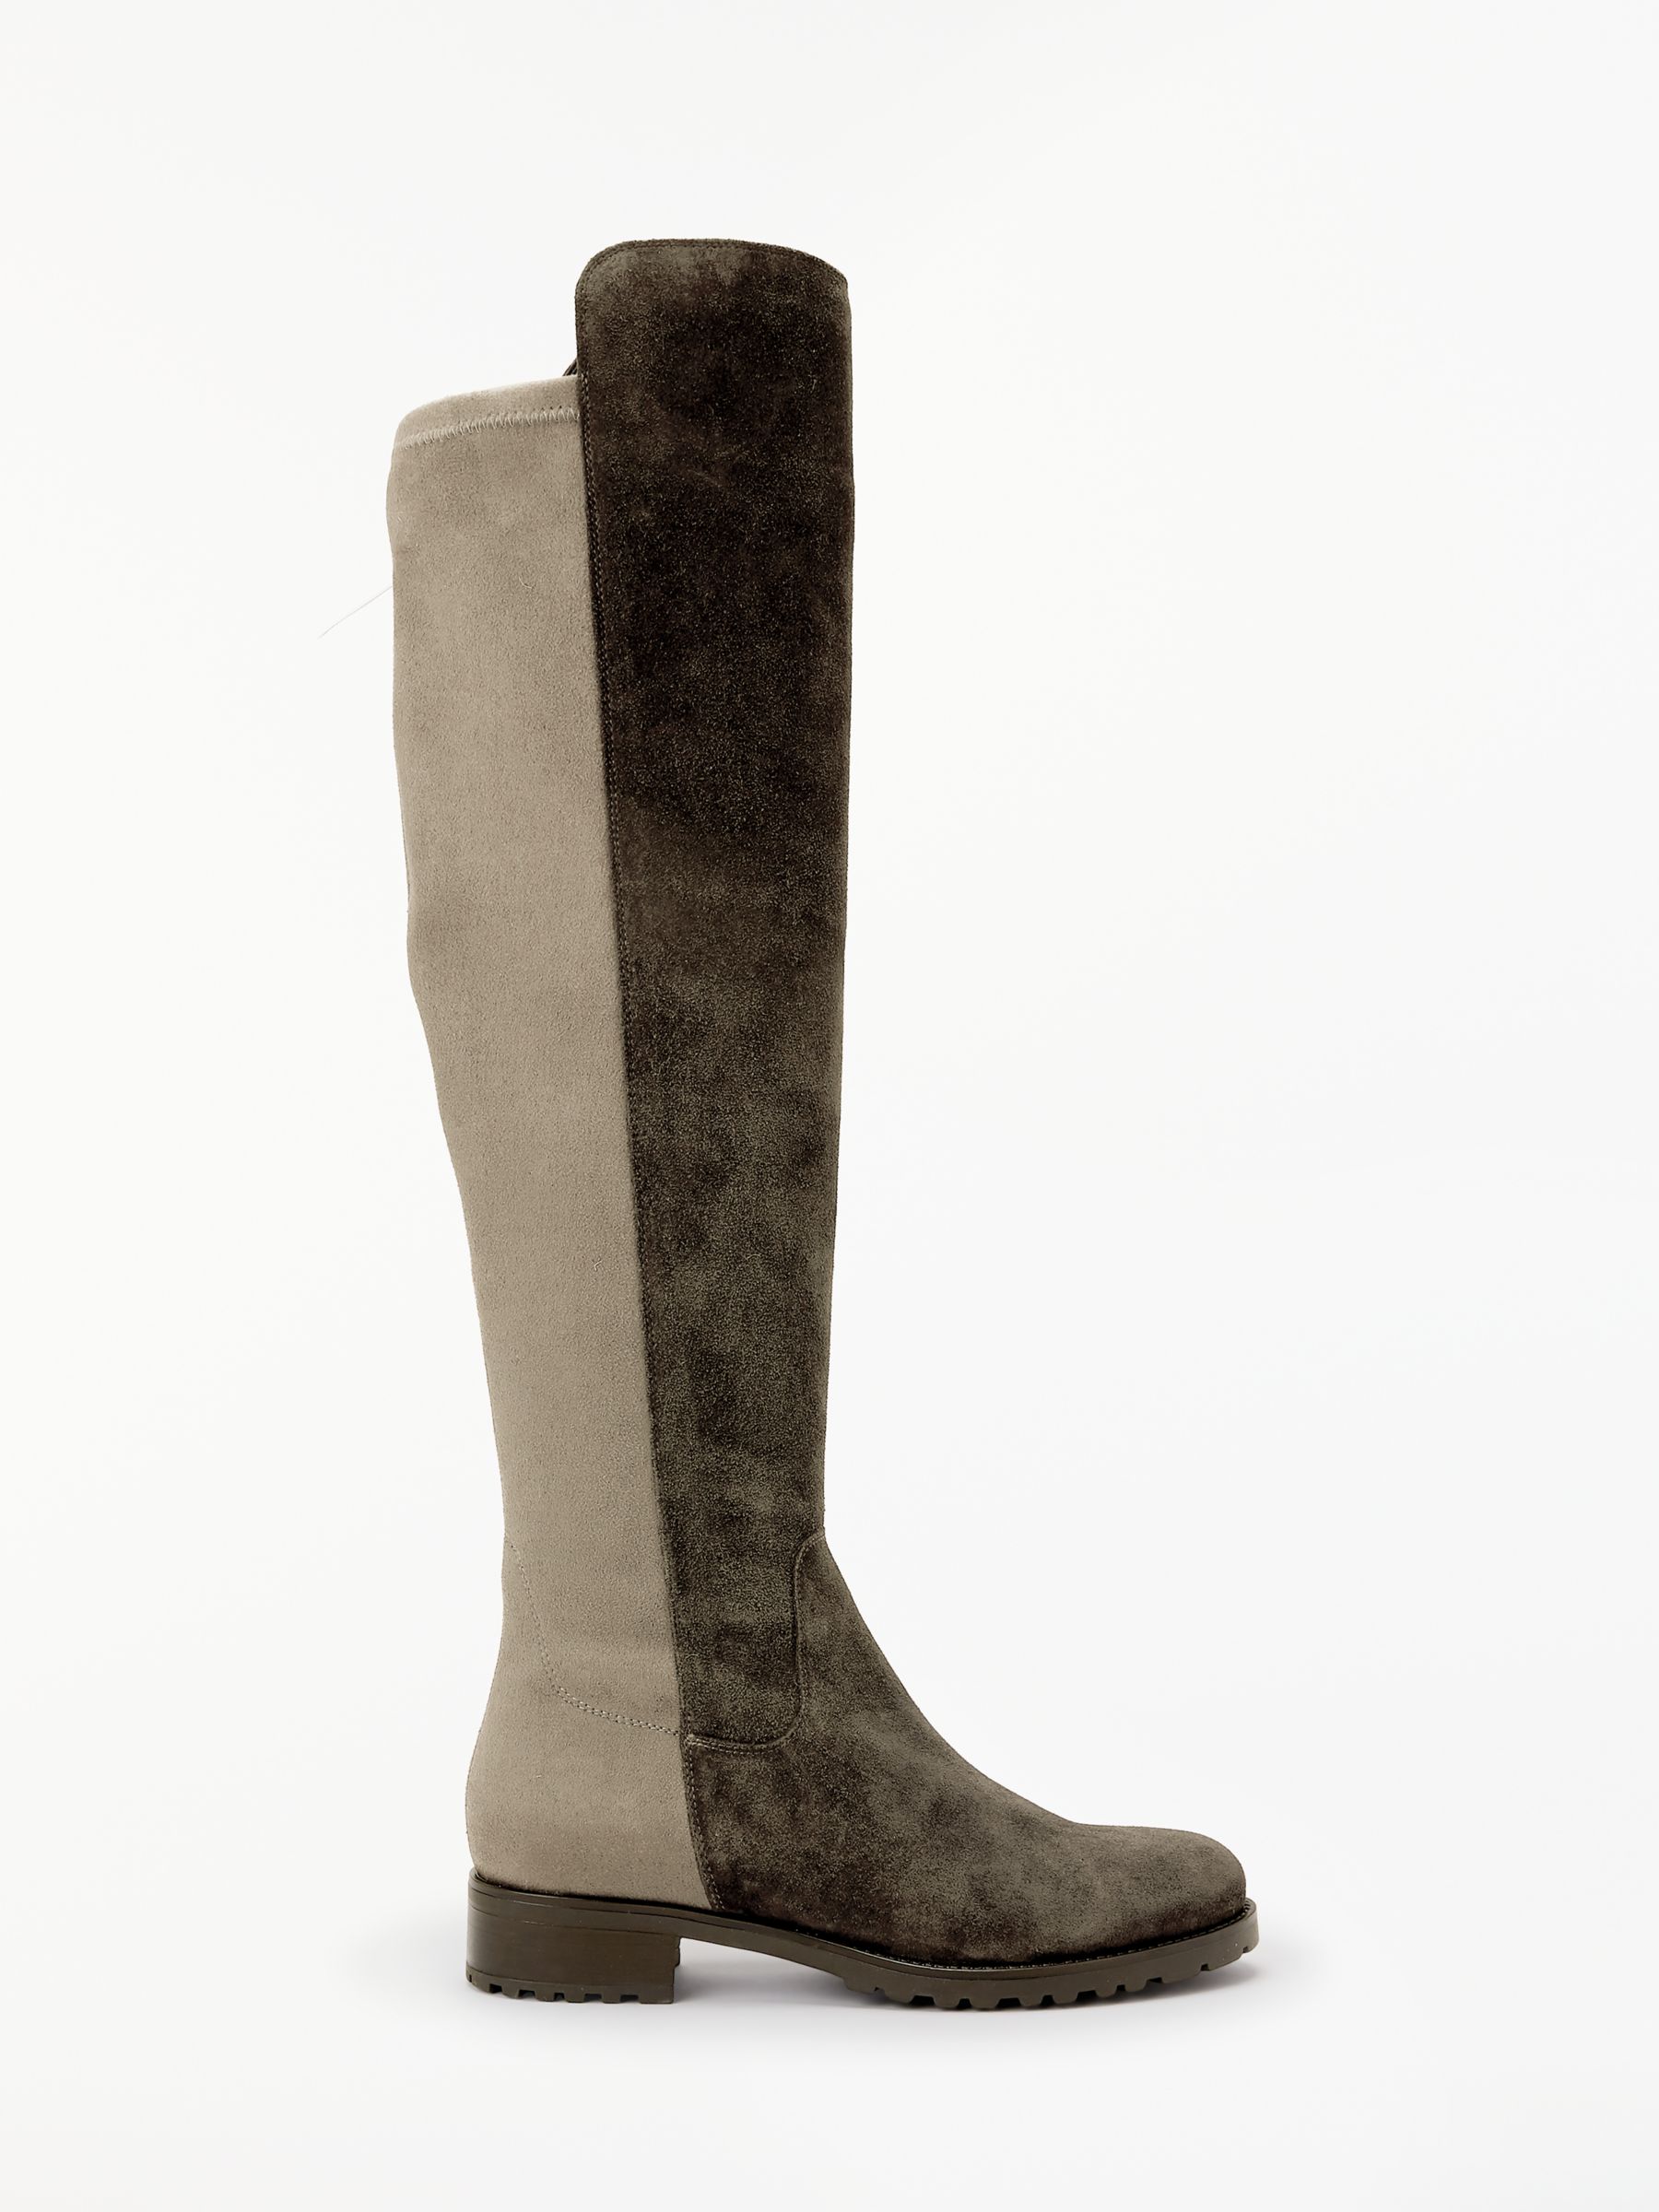 John Lewis & Partners Tilde Over The Knee Boots, Neutral Suede